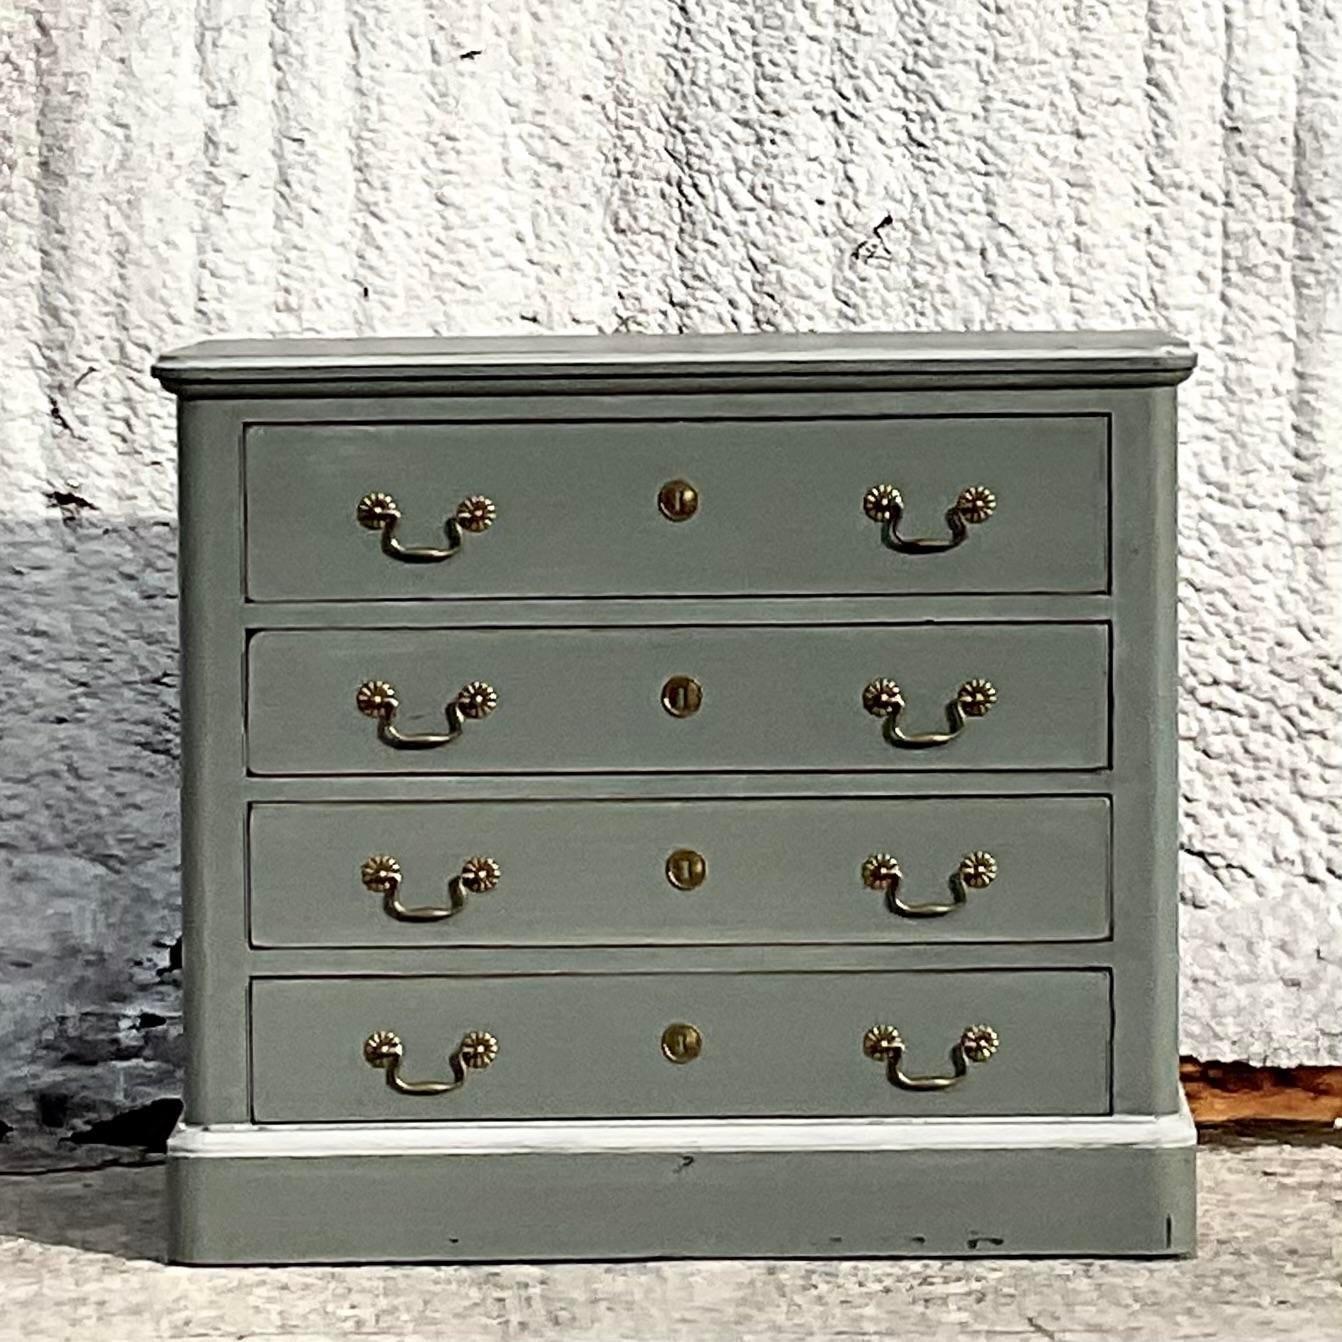 A fabulous vintage Boho chest of drawers. A chic little cabinet painted a dove grey with white tipping. Burnished brass hardware. Acquired from a Westport estate.